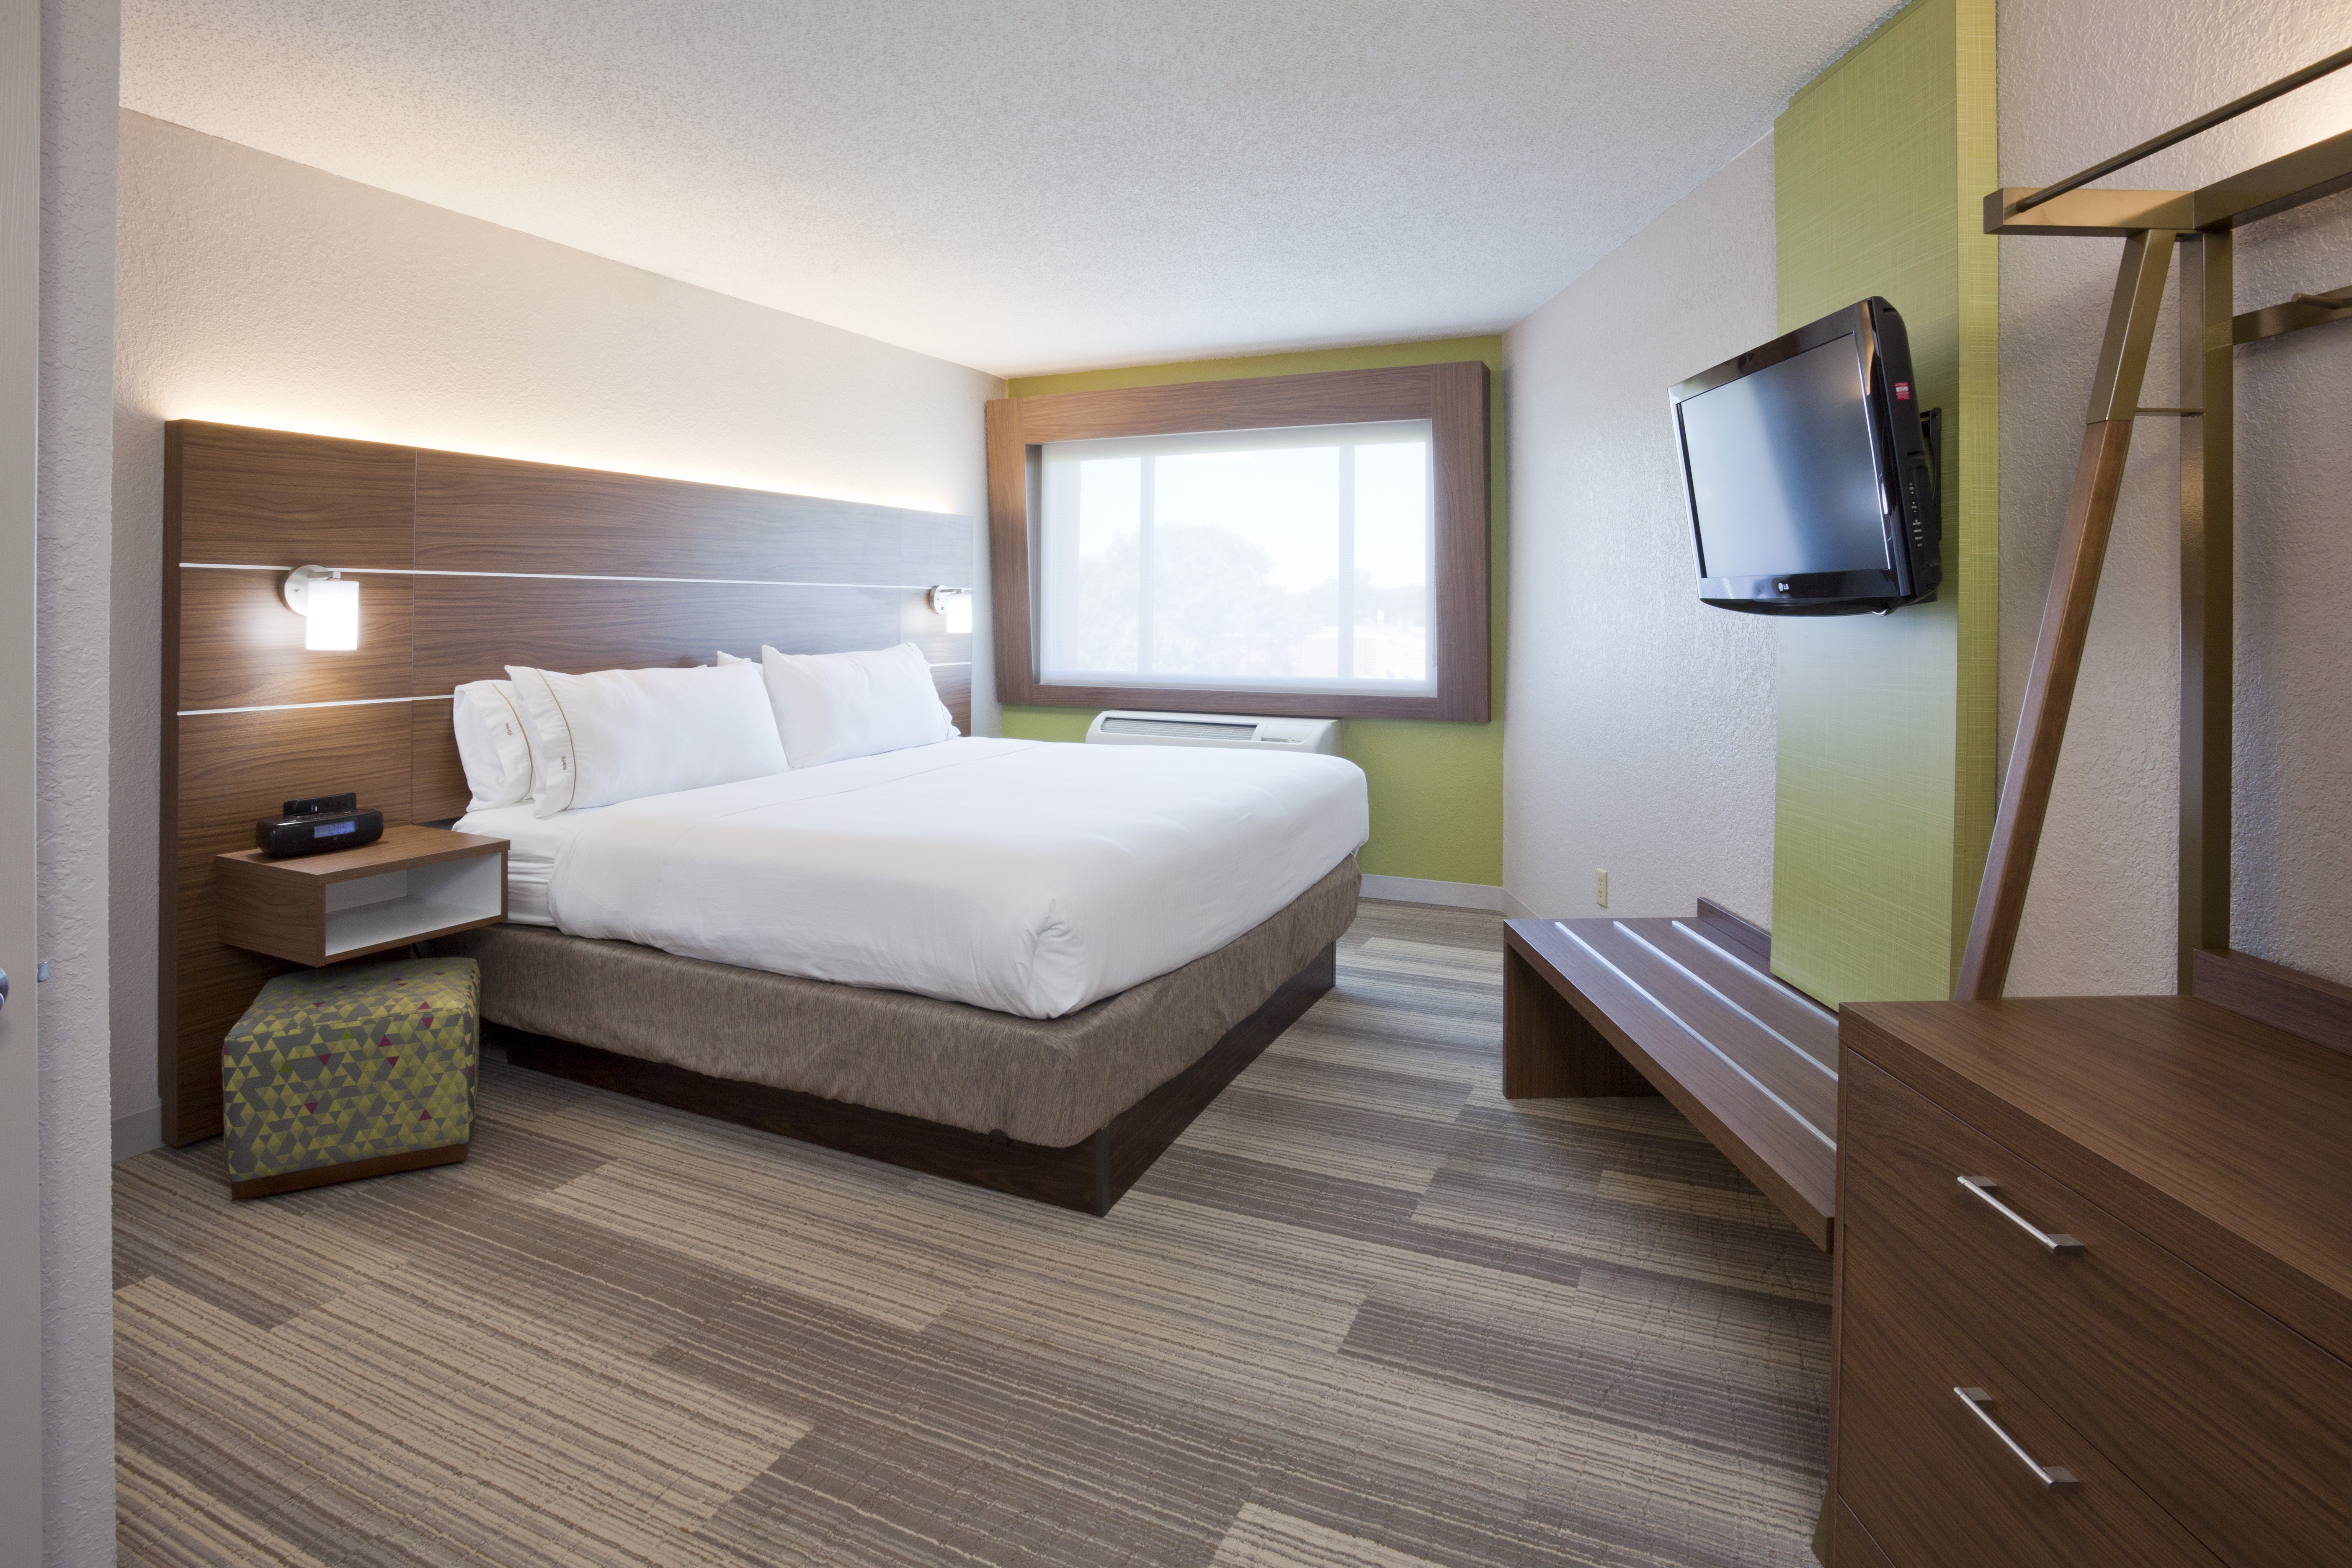 Enjoy having extra space minutes from downtown Minneapolis! 